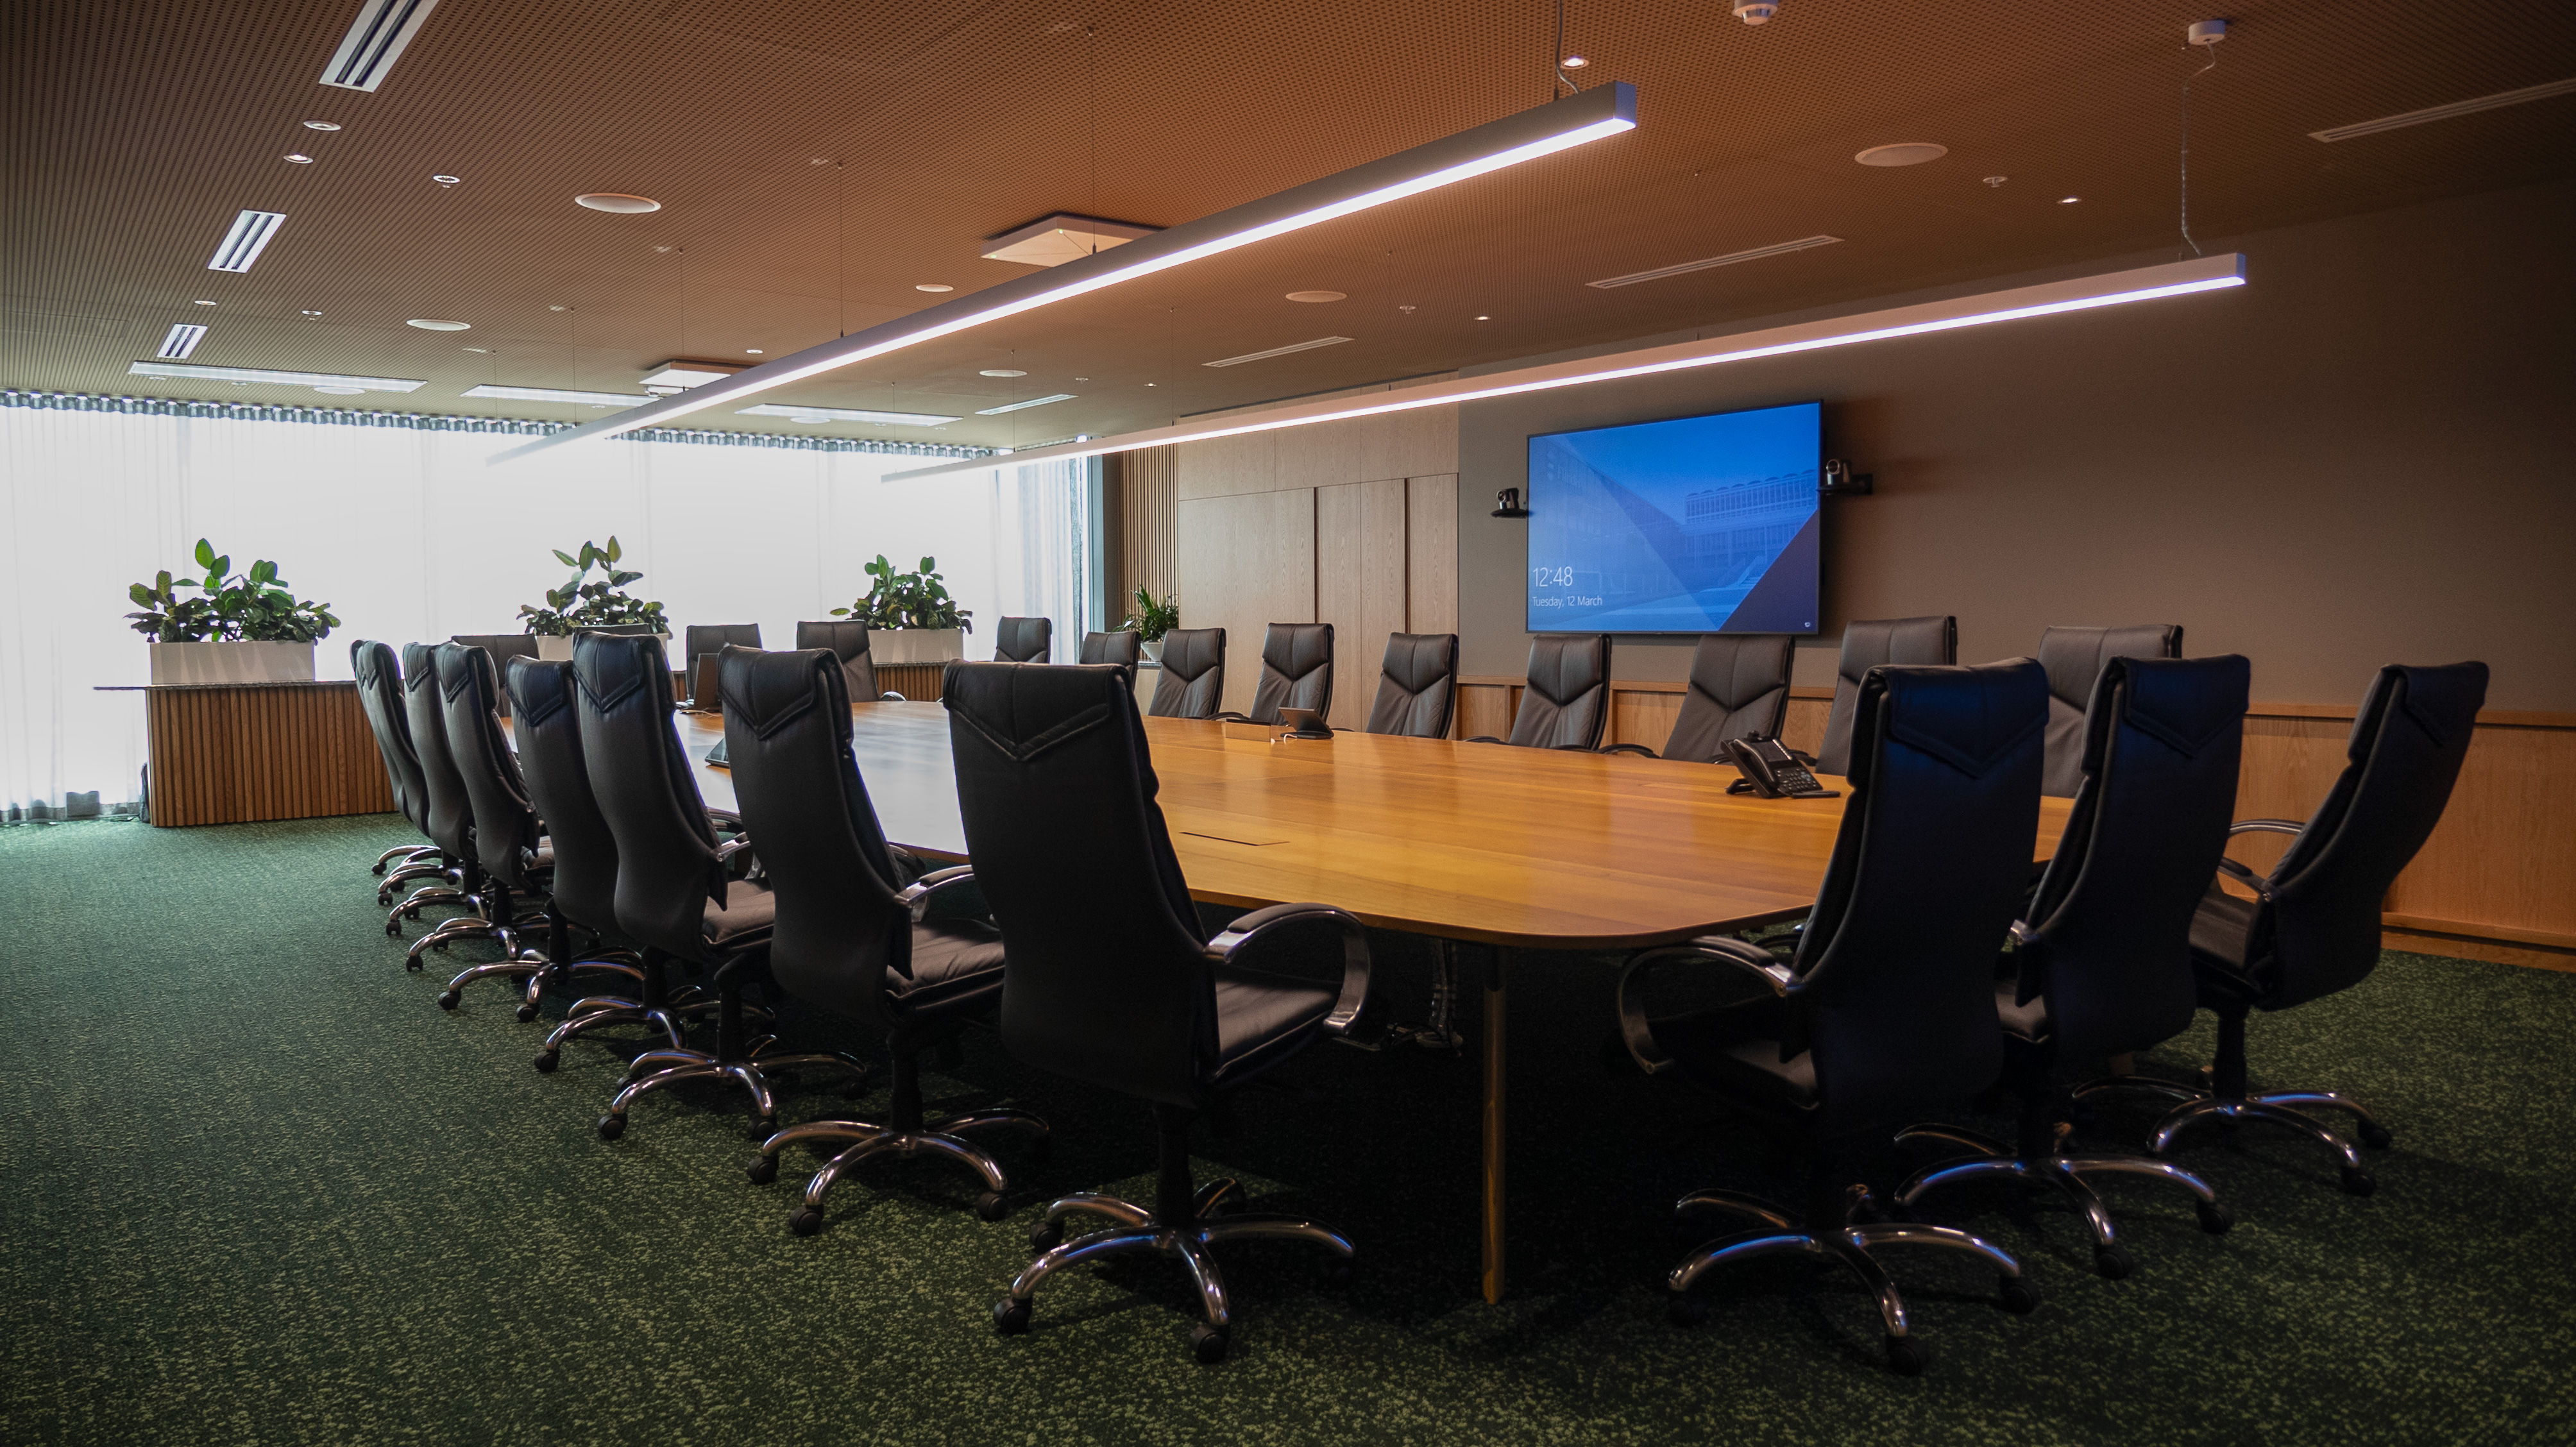 An example of the Flinders University boardroom equipped with Sennheiser gear.